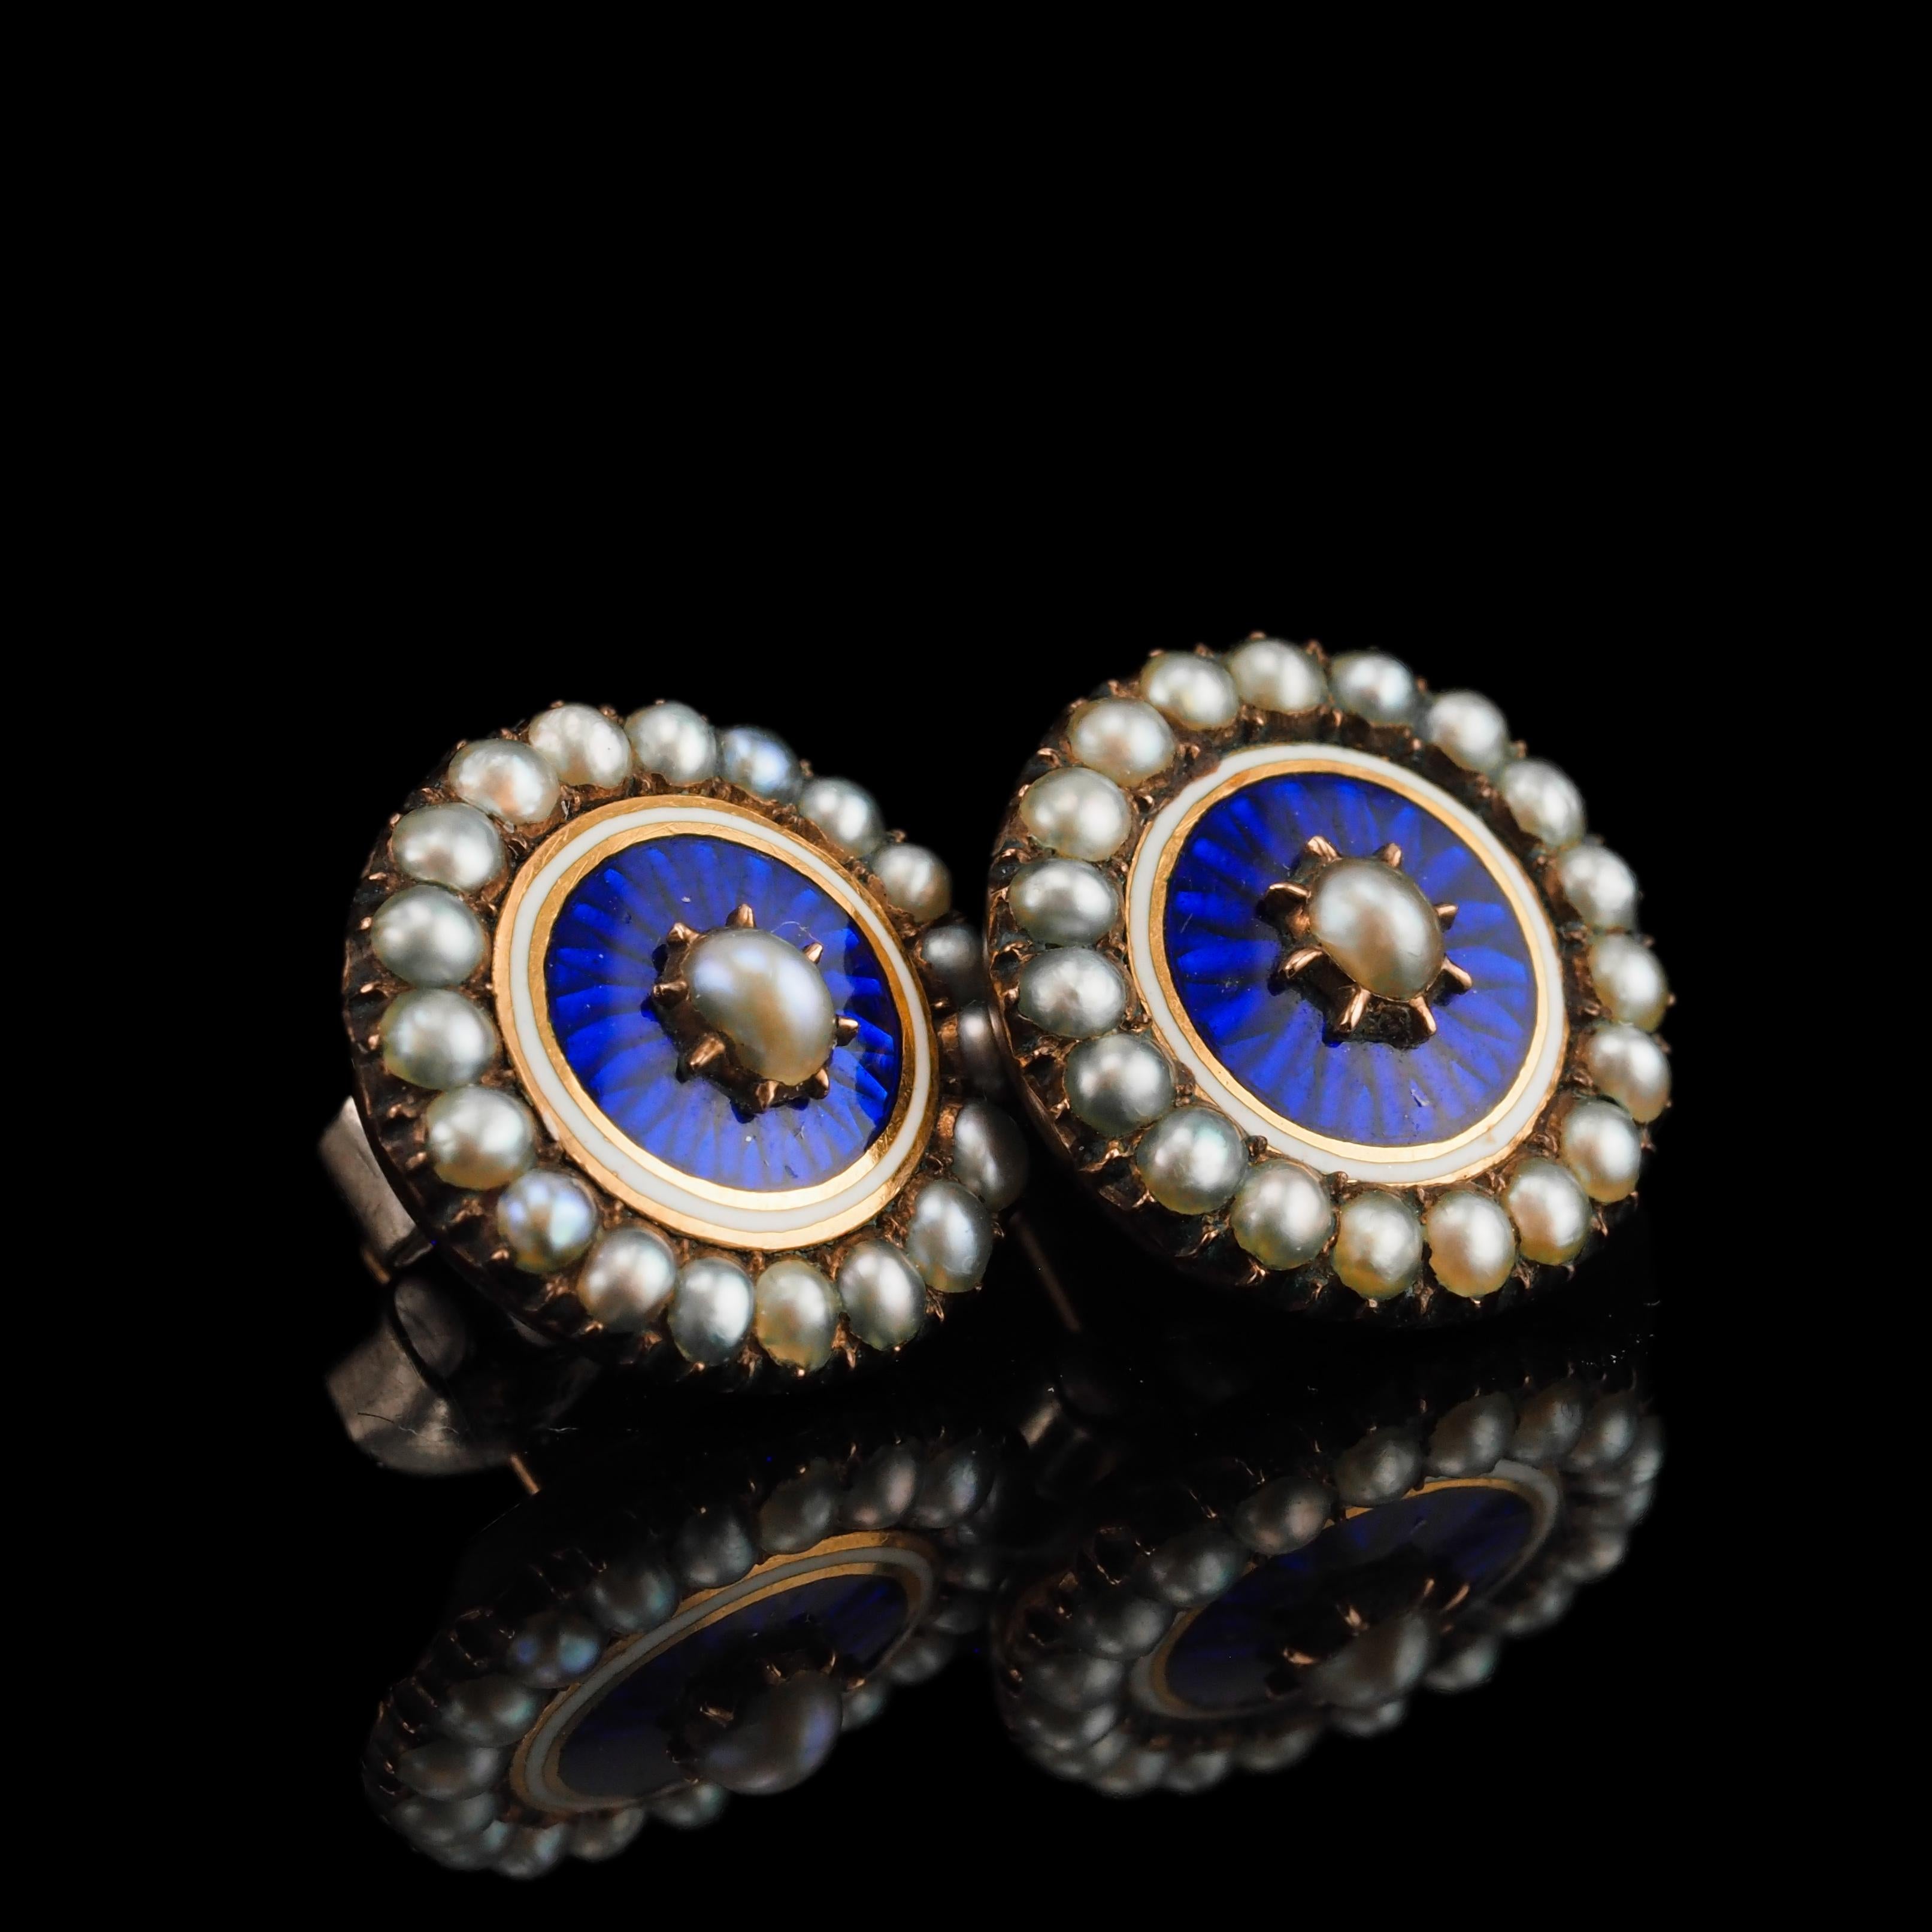 Antique Georgian Gold Earrings with Blue Enamel Guilloche Pearl Cluster c.1800 For Sale 7